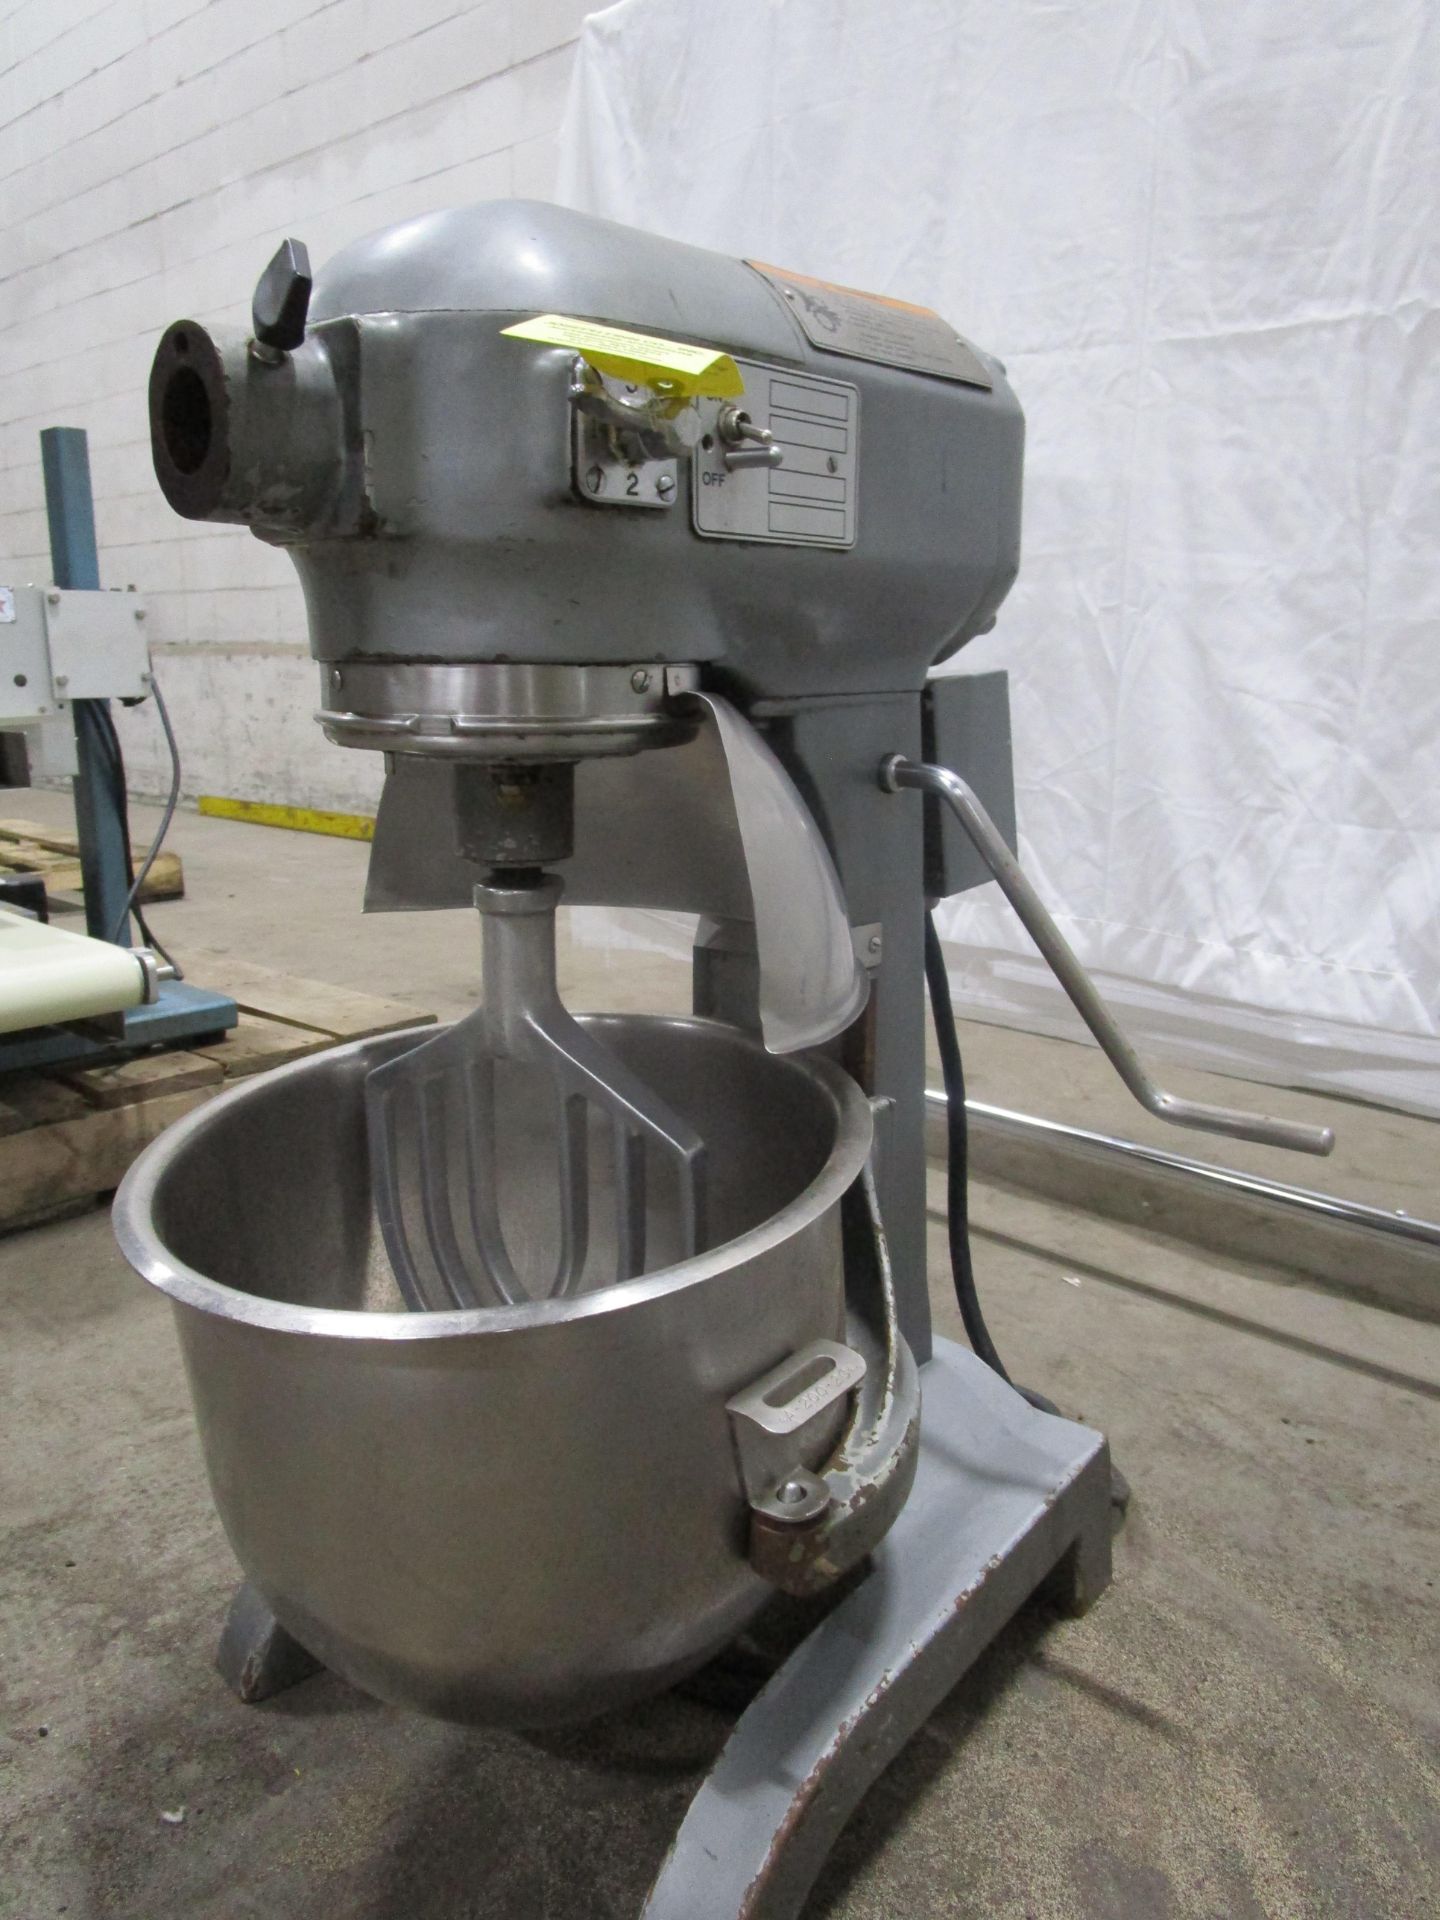 (1) Hobart A-200 Mixer, s/n 11-034-826, 20 Qt, Bowl & Whip | Located in Milford MA | Rig Fee: $50 - Image 2 of 3